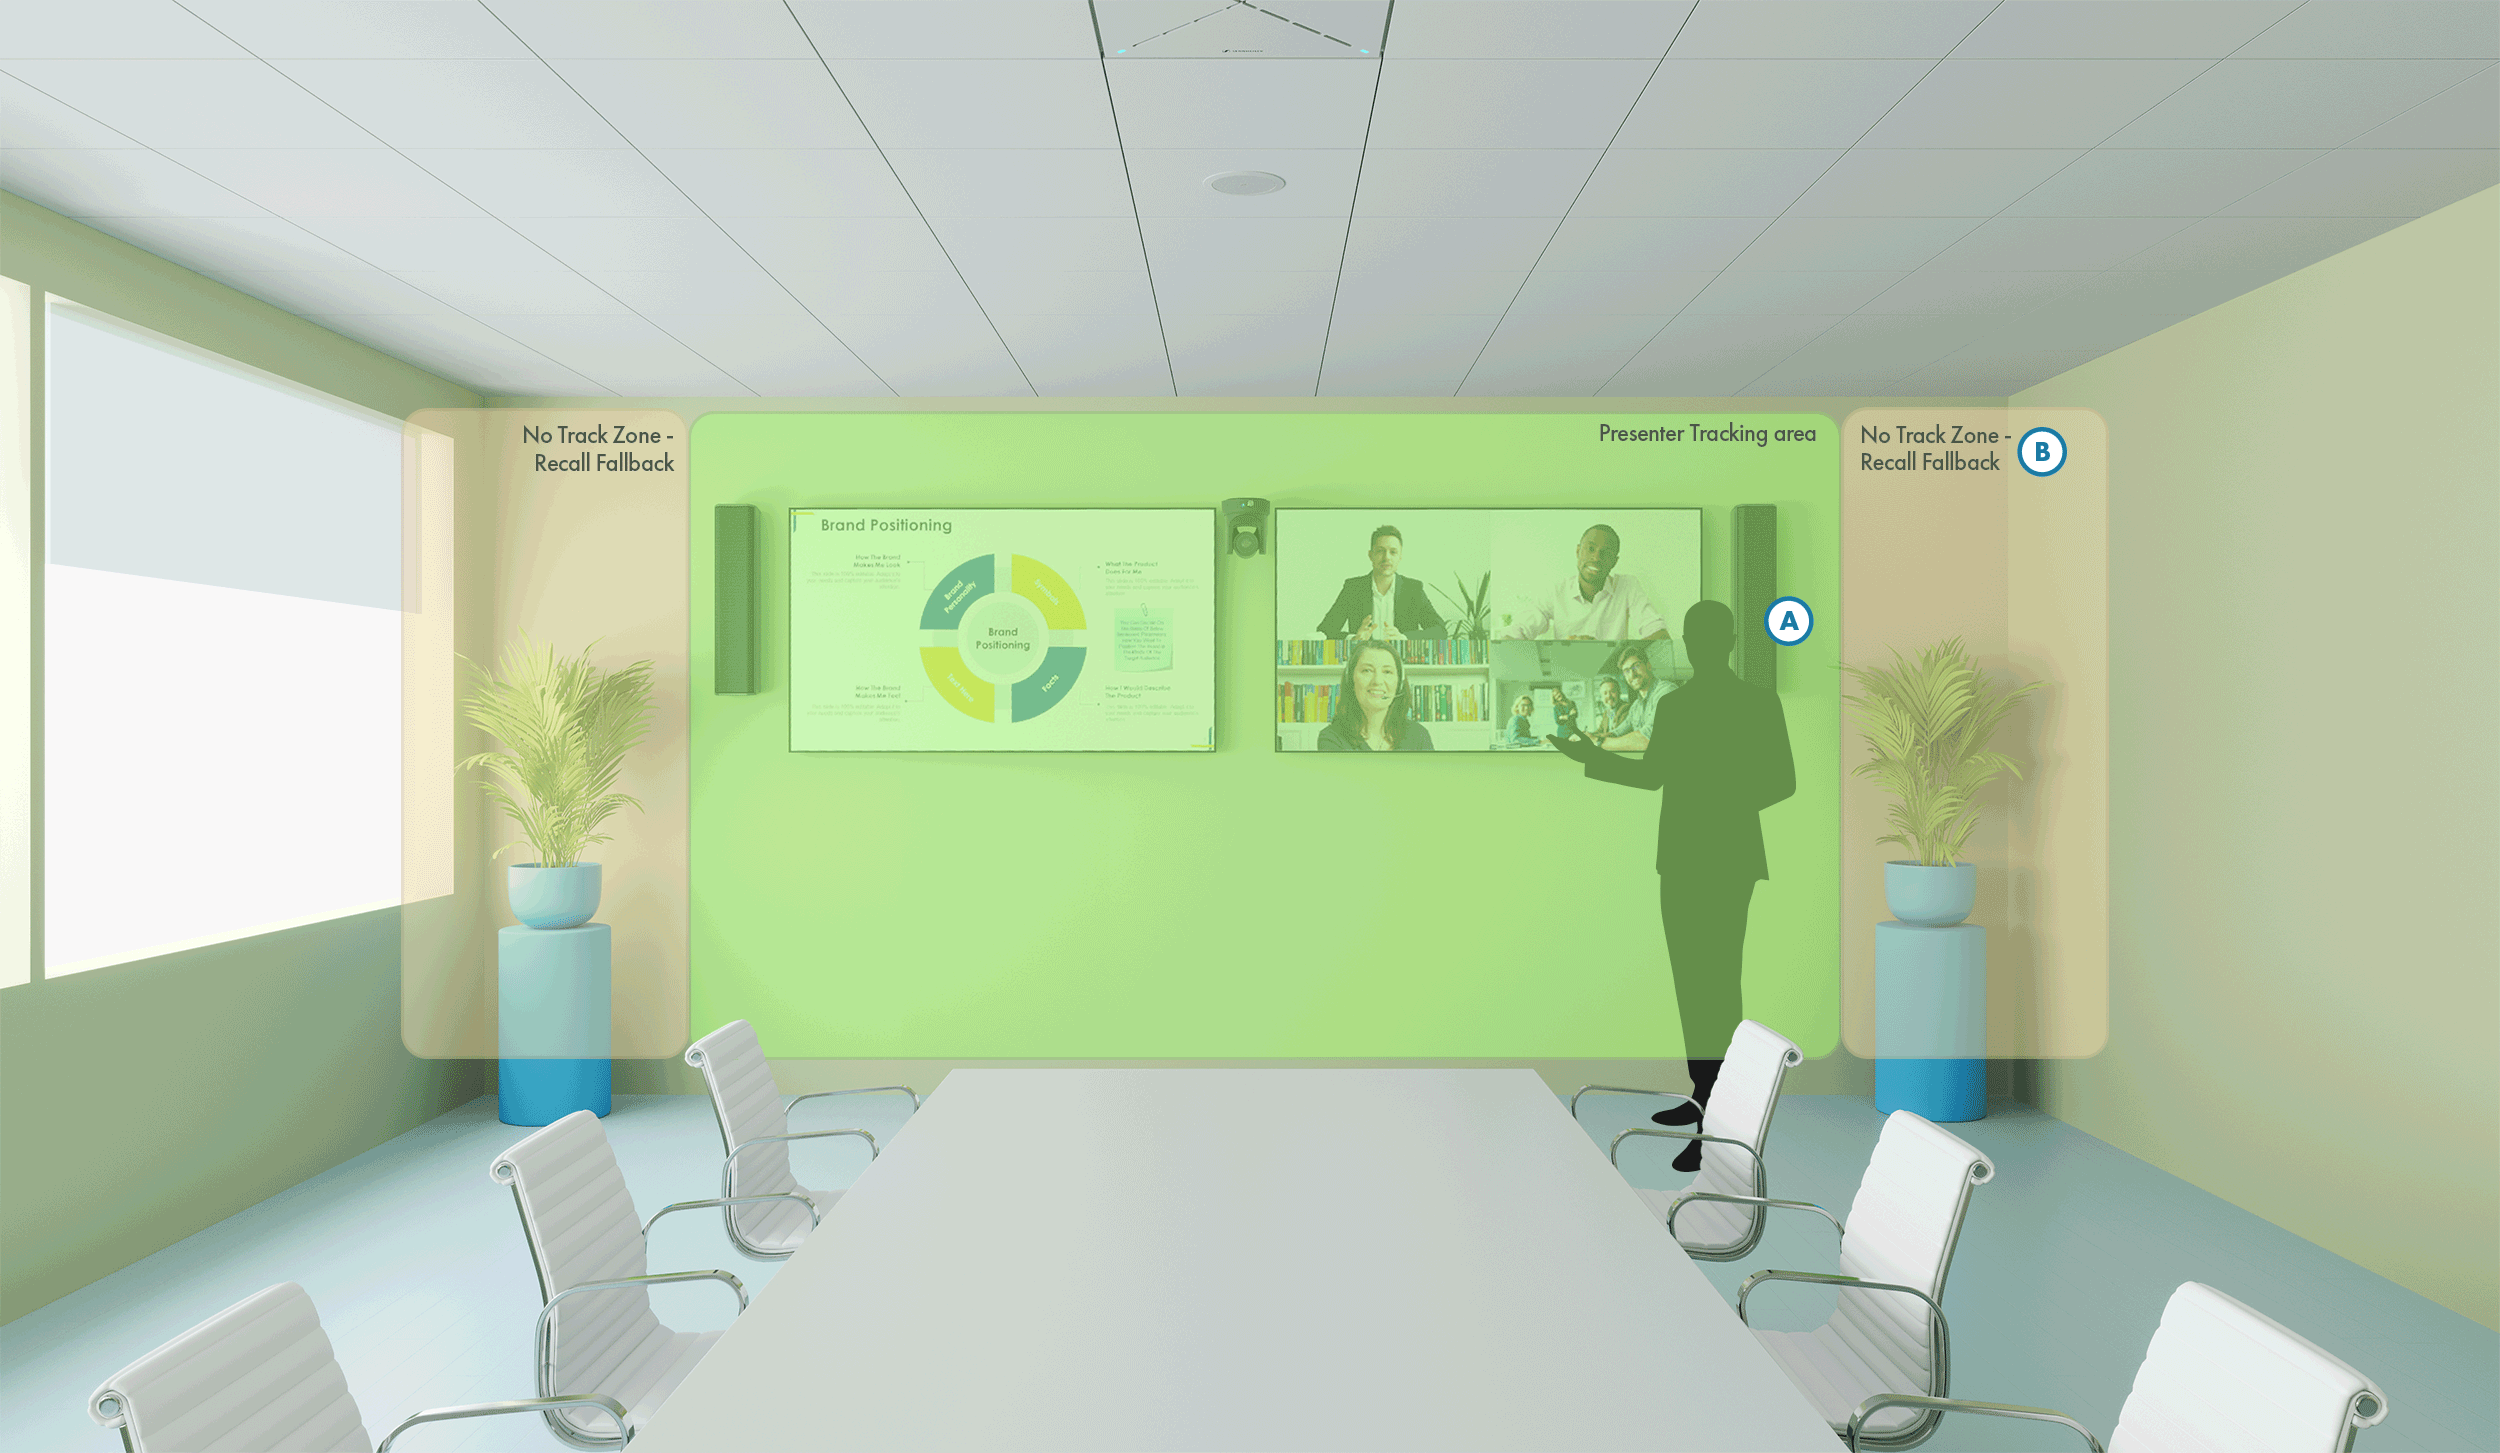 Illustration of a presenter in a boardroom that features Q-SYS peripherals, with the presenter tracking area highlighted